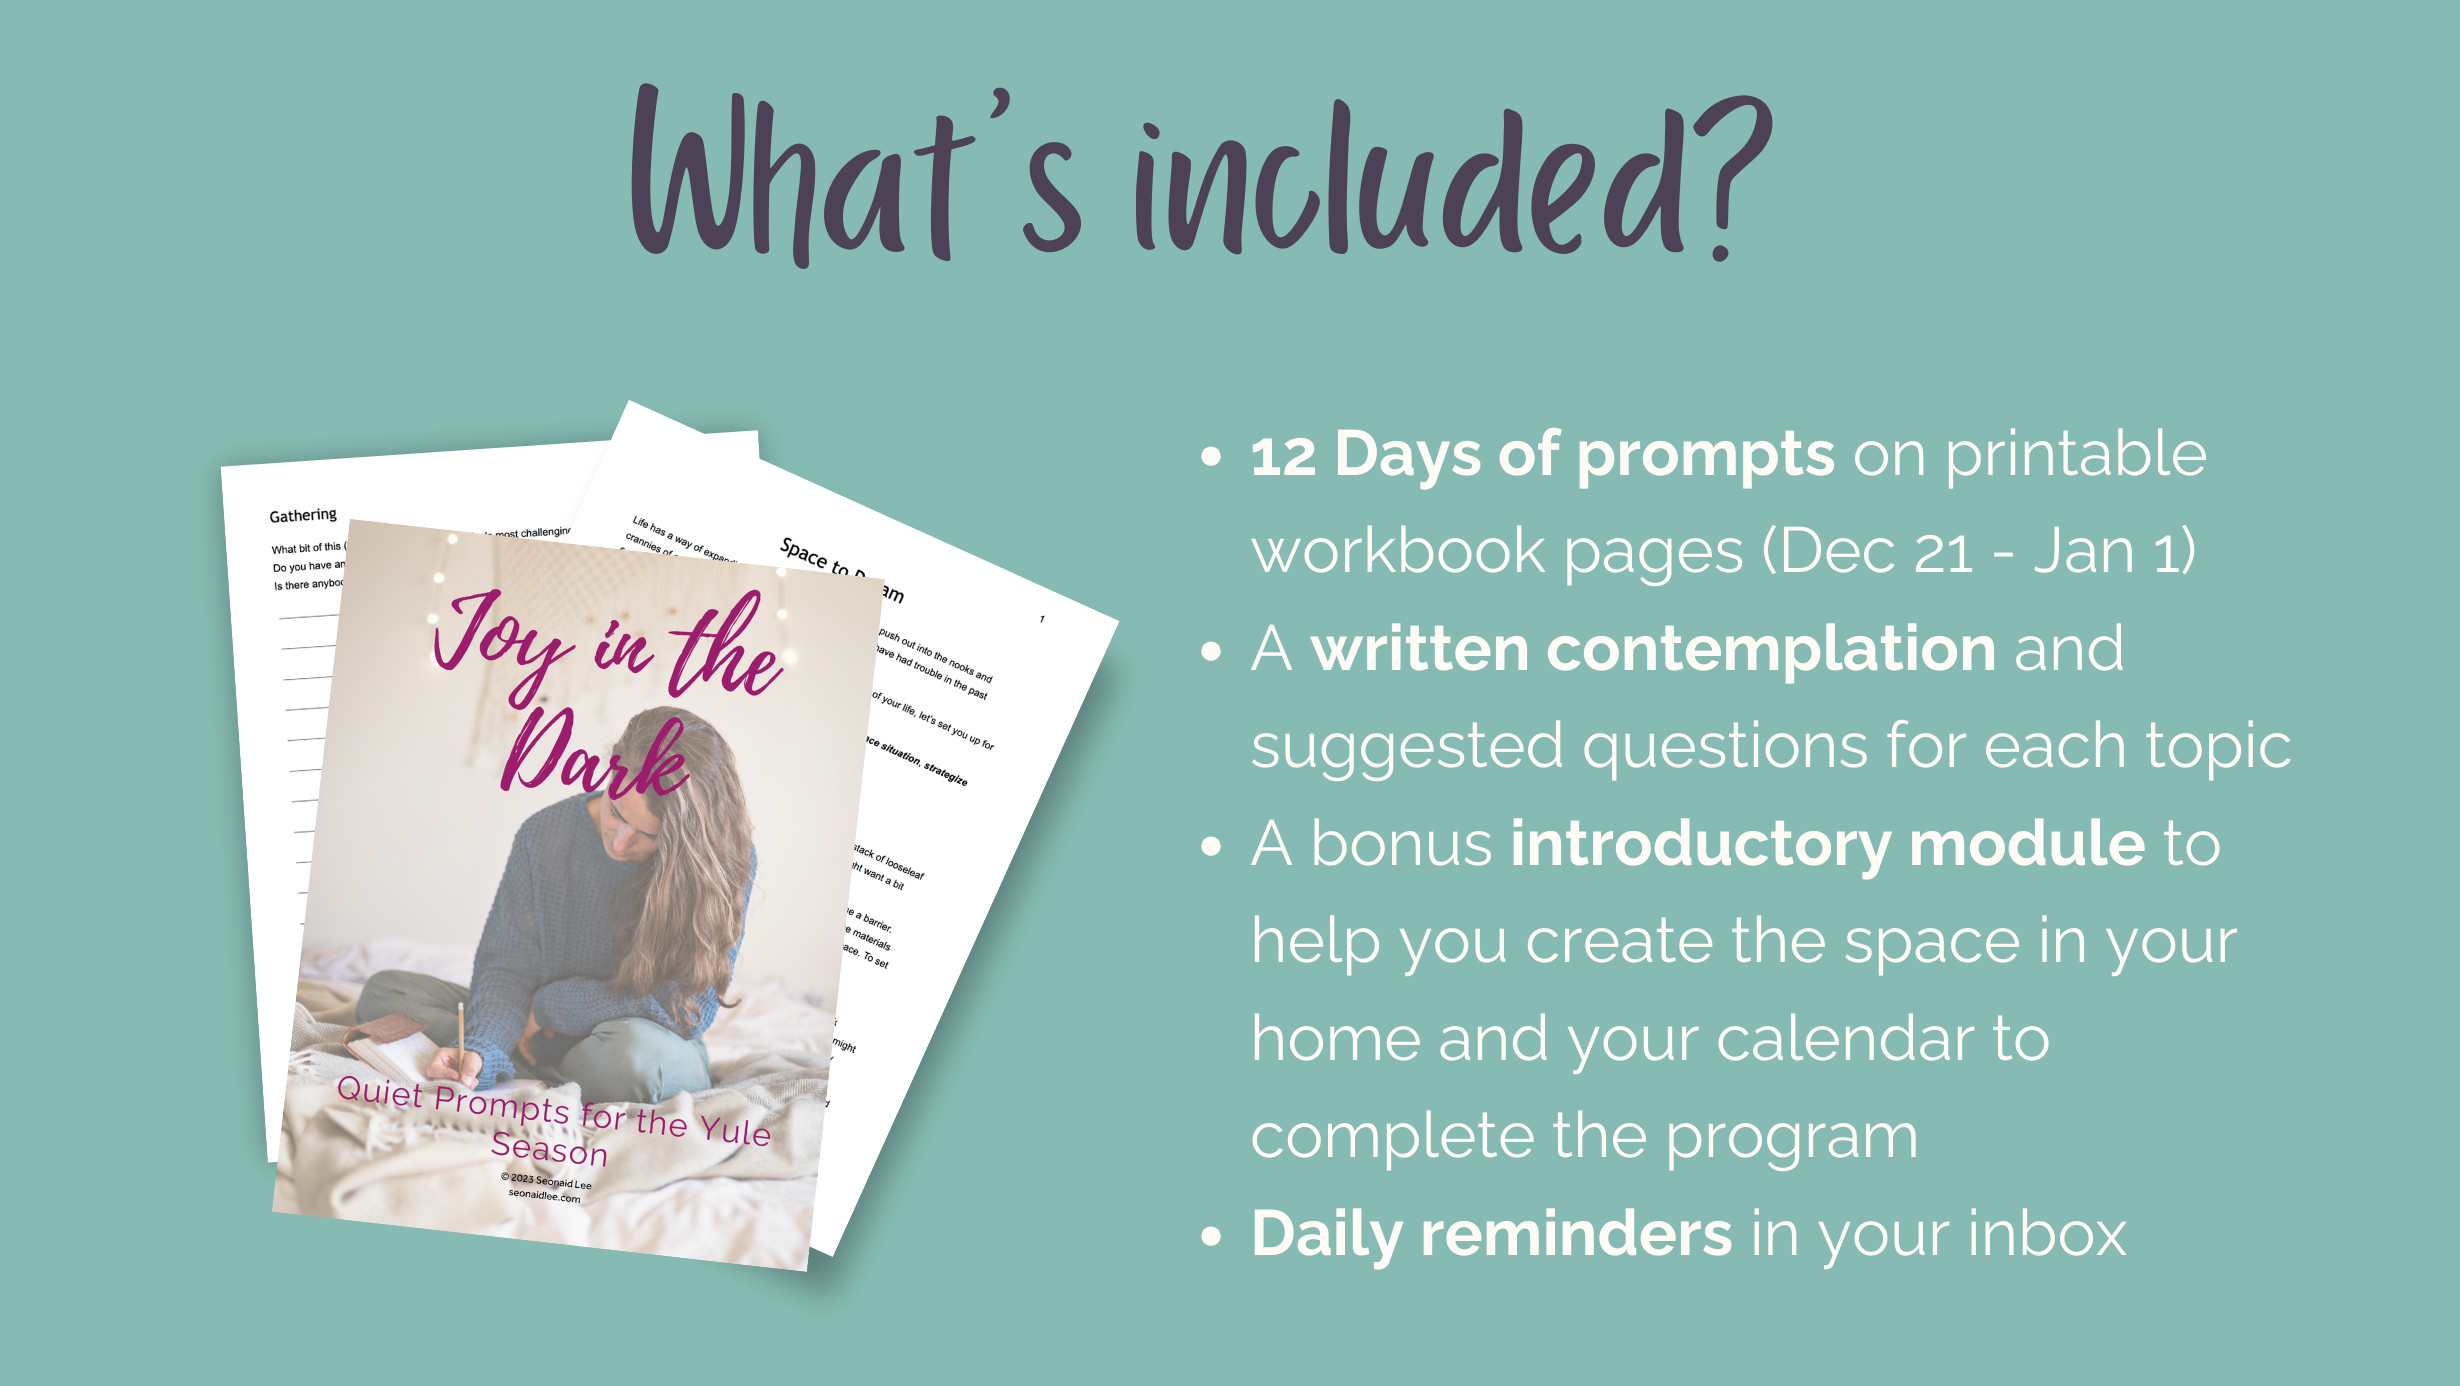 What's Included 

12 Days of prompts on printable workbook pages

Instructions and suggested questions for each topic

A bonus introductory module to help you create the space in your home and your calendar to complete the program

Daily reminders in your inbox